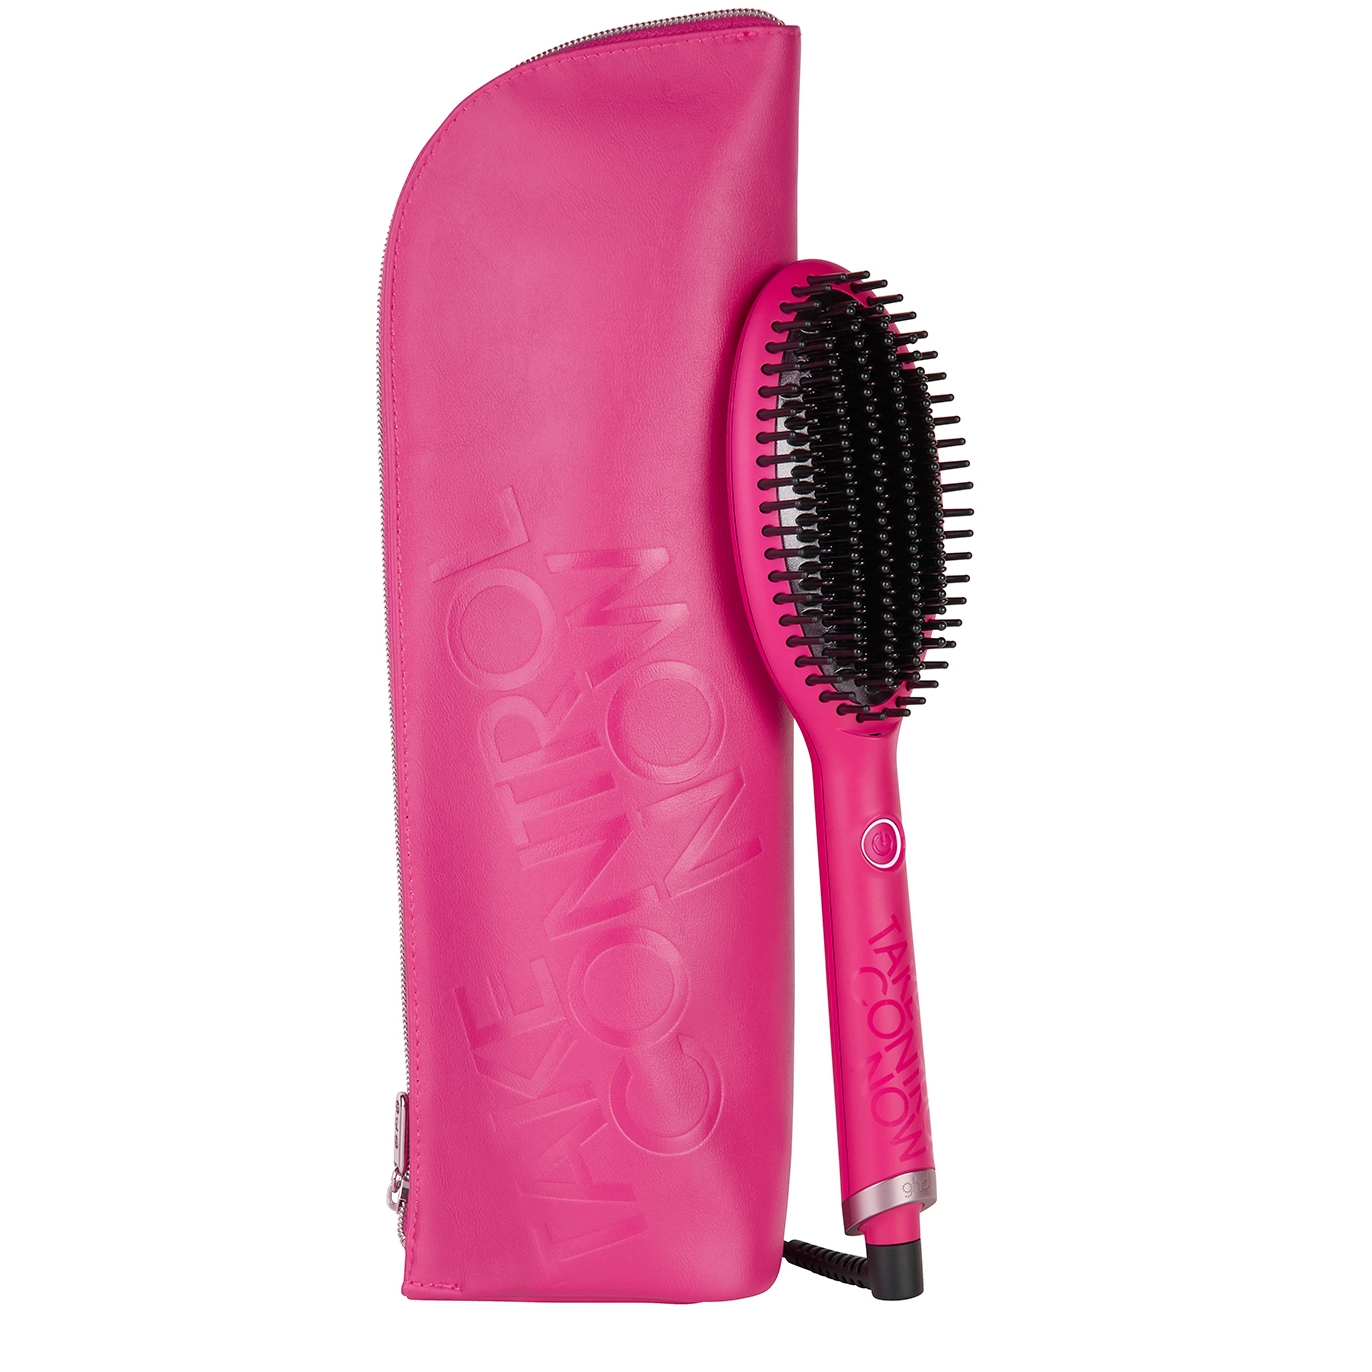 Ghd Glide Hot Brush - Pink Charity Edition